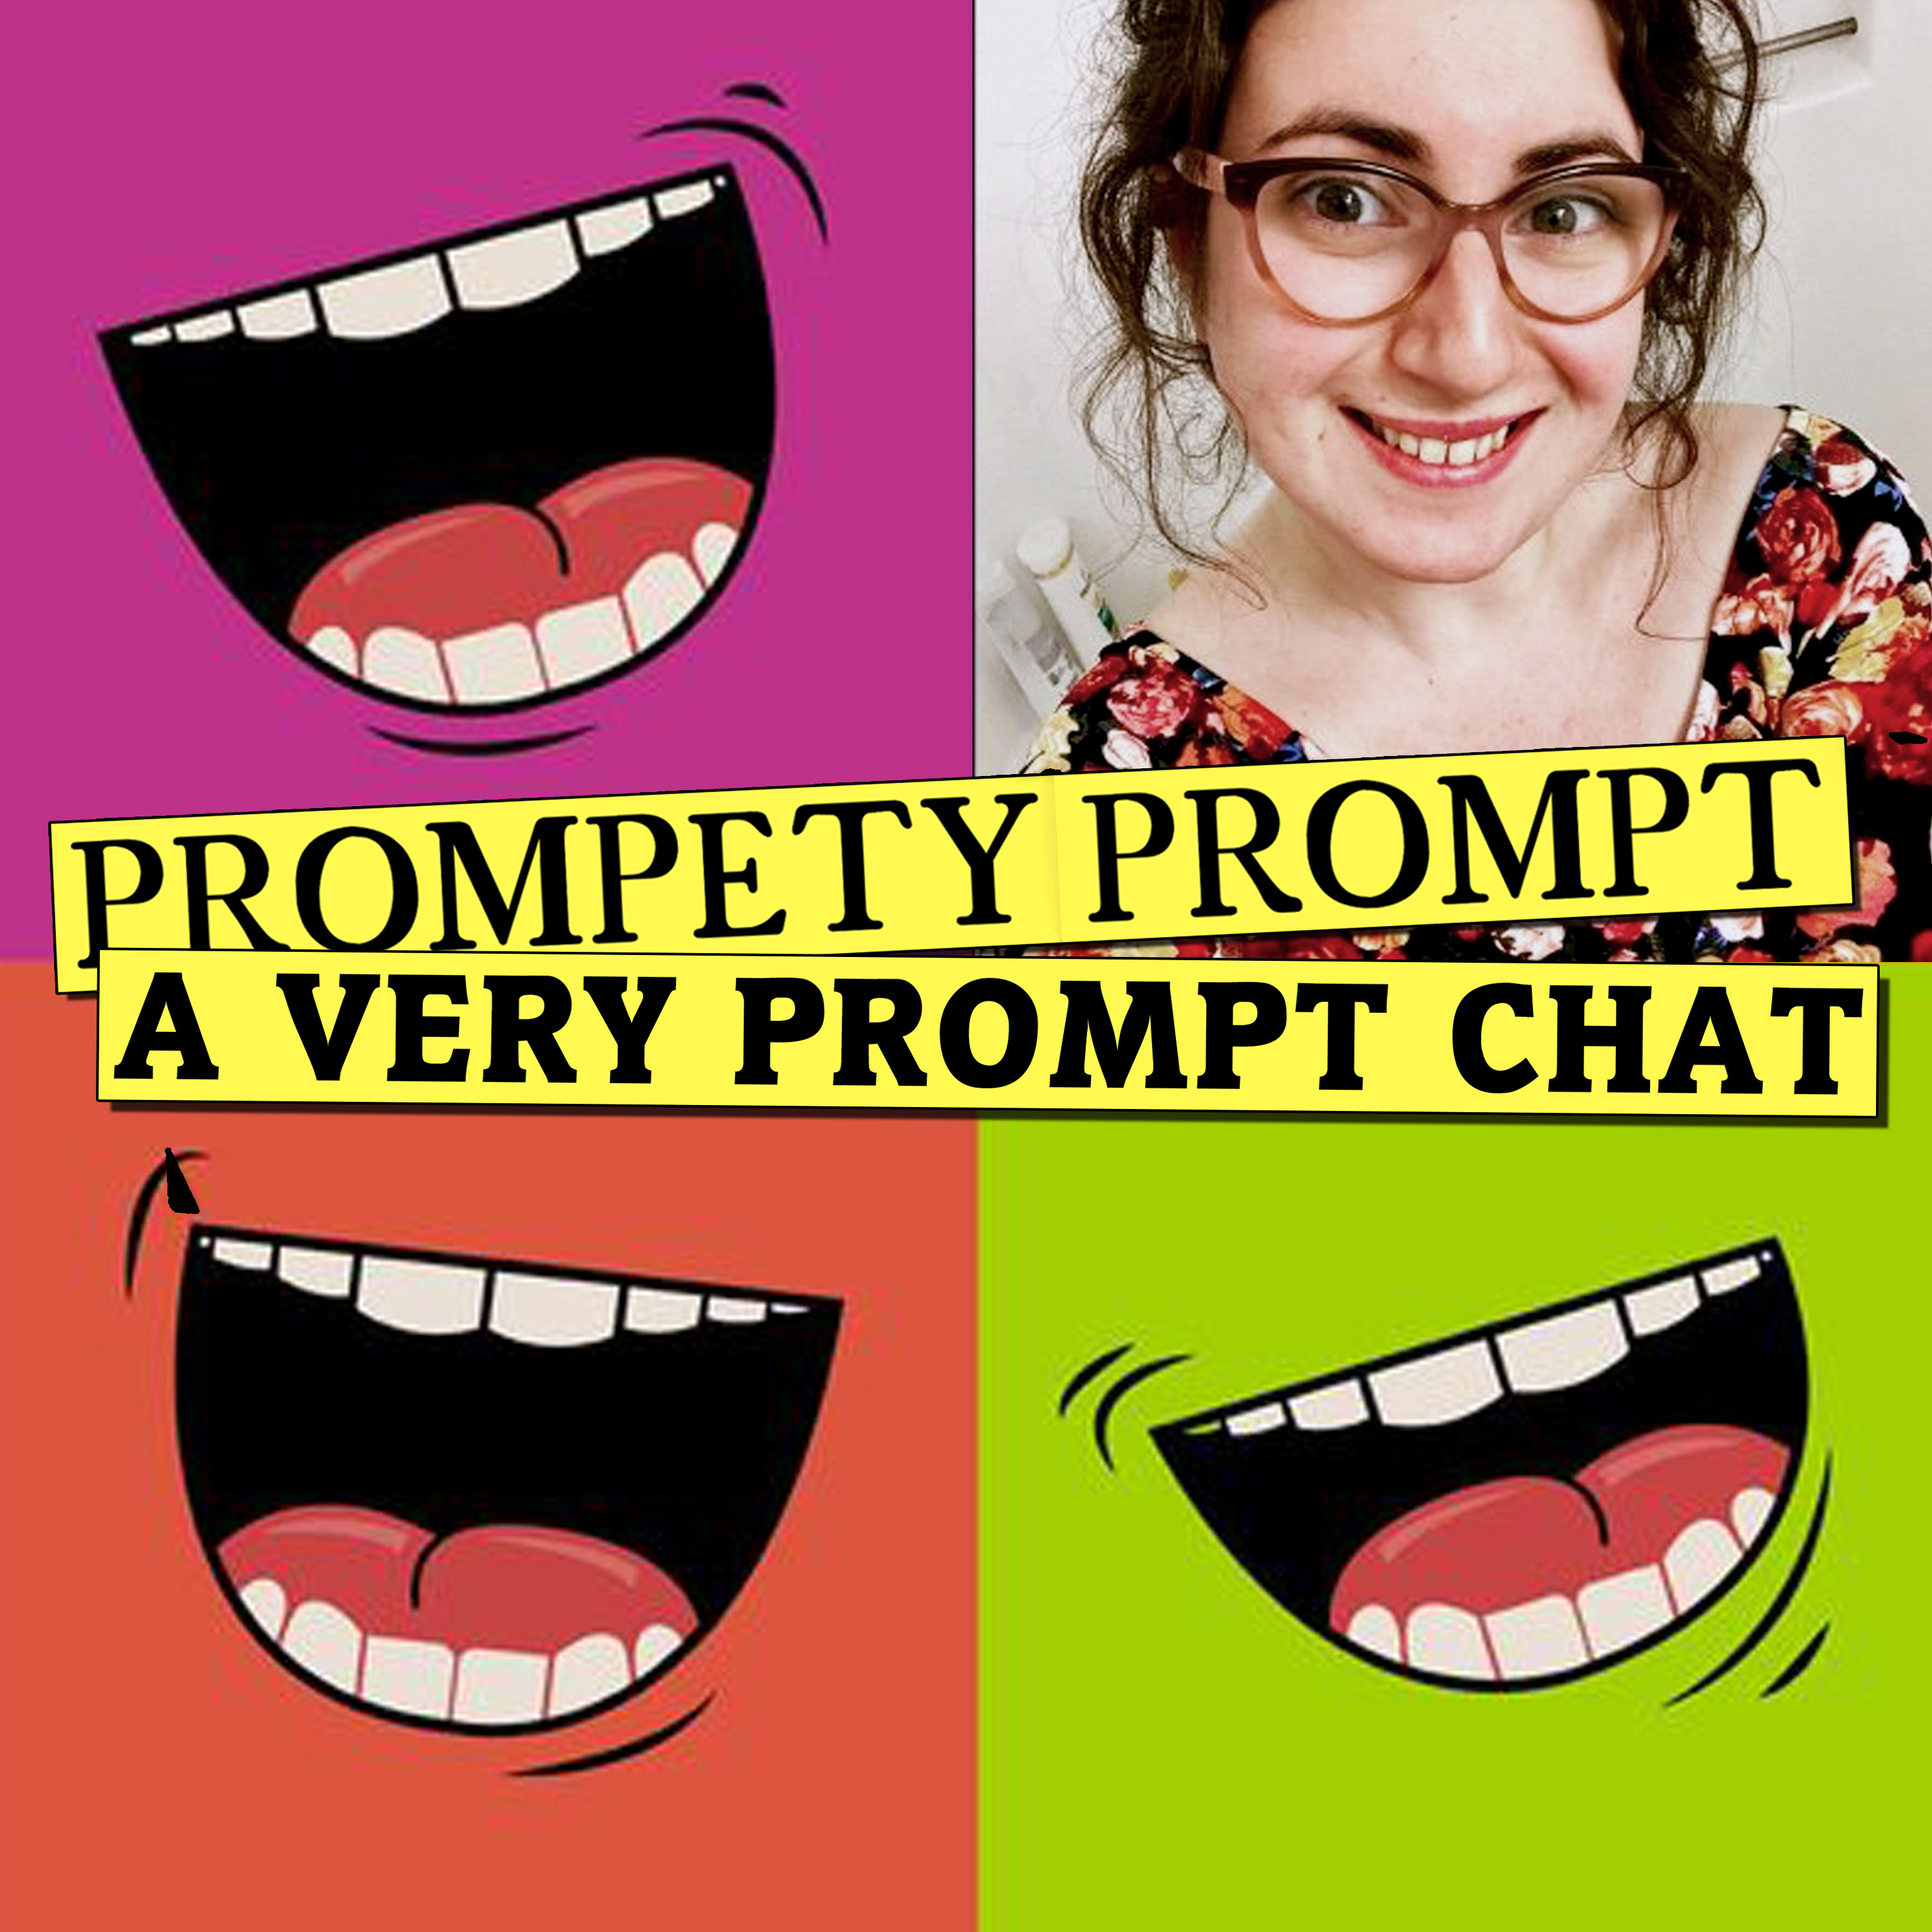 A Very Prompt Chat - Sharisse Zeroonian